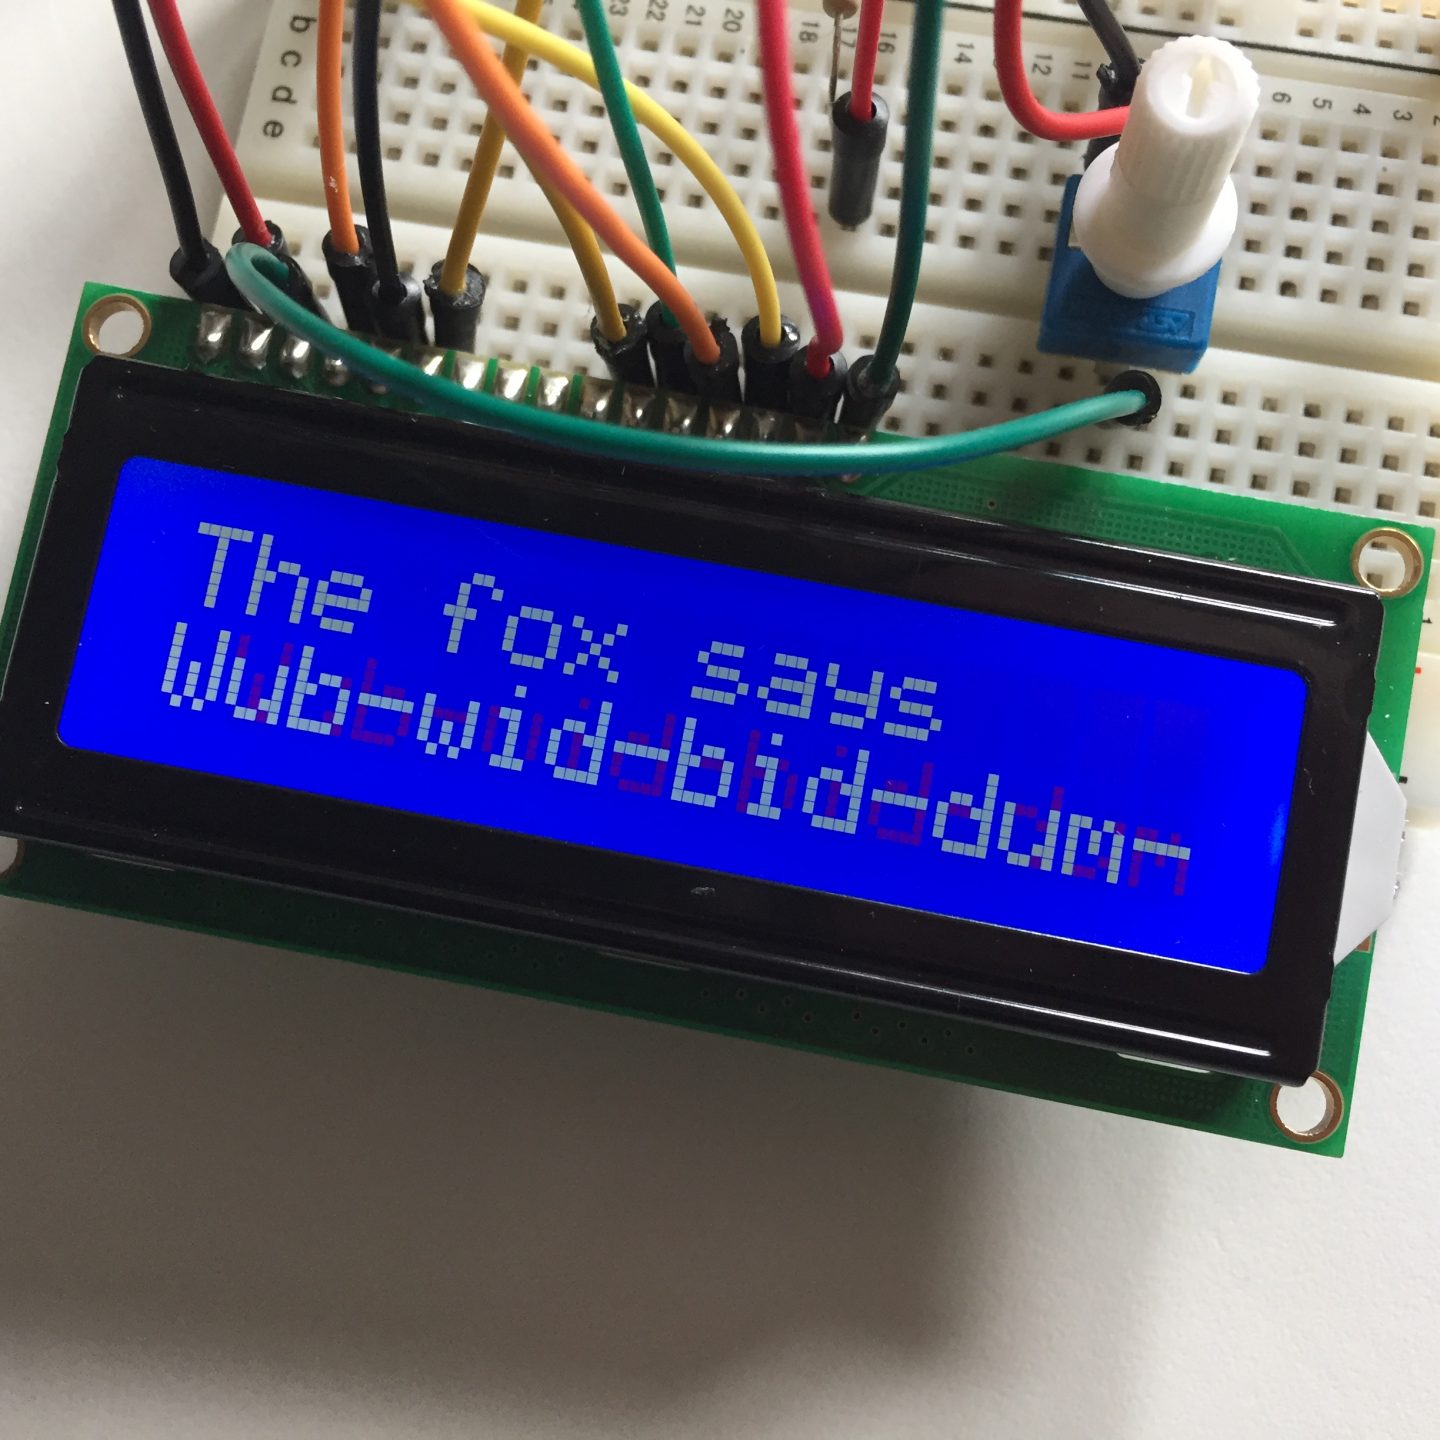 What Does The Fox Say? (Arduino LCD Version)